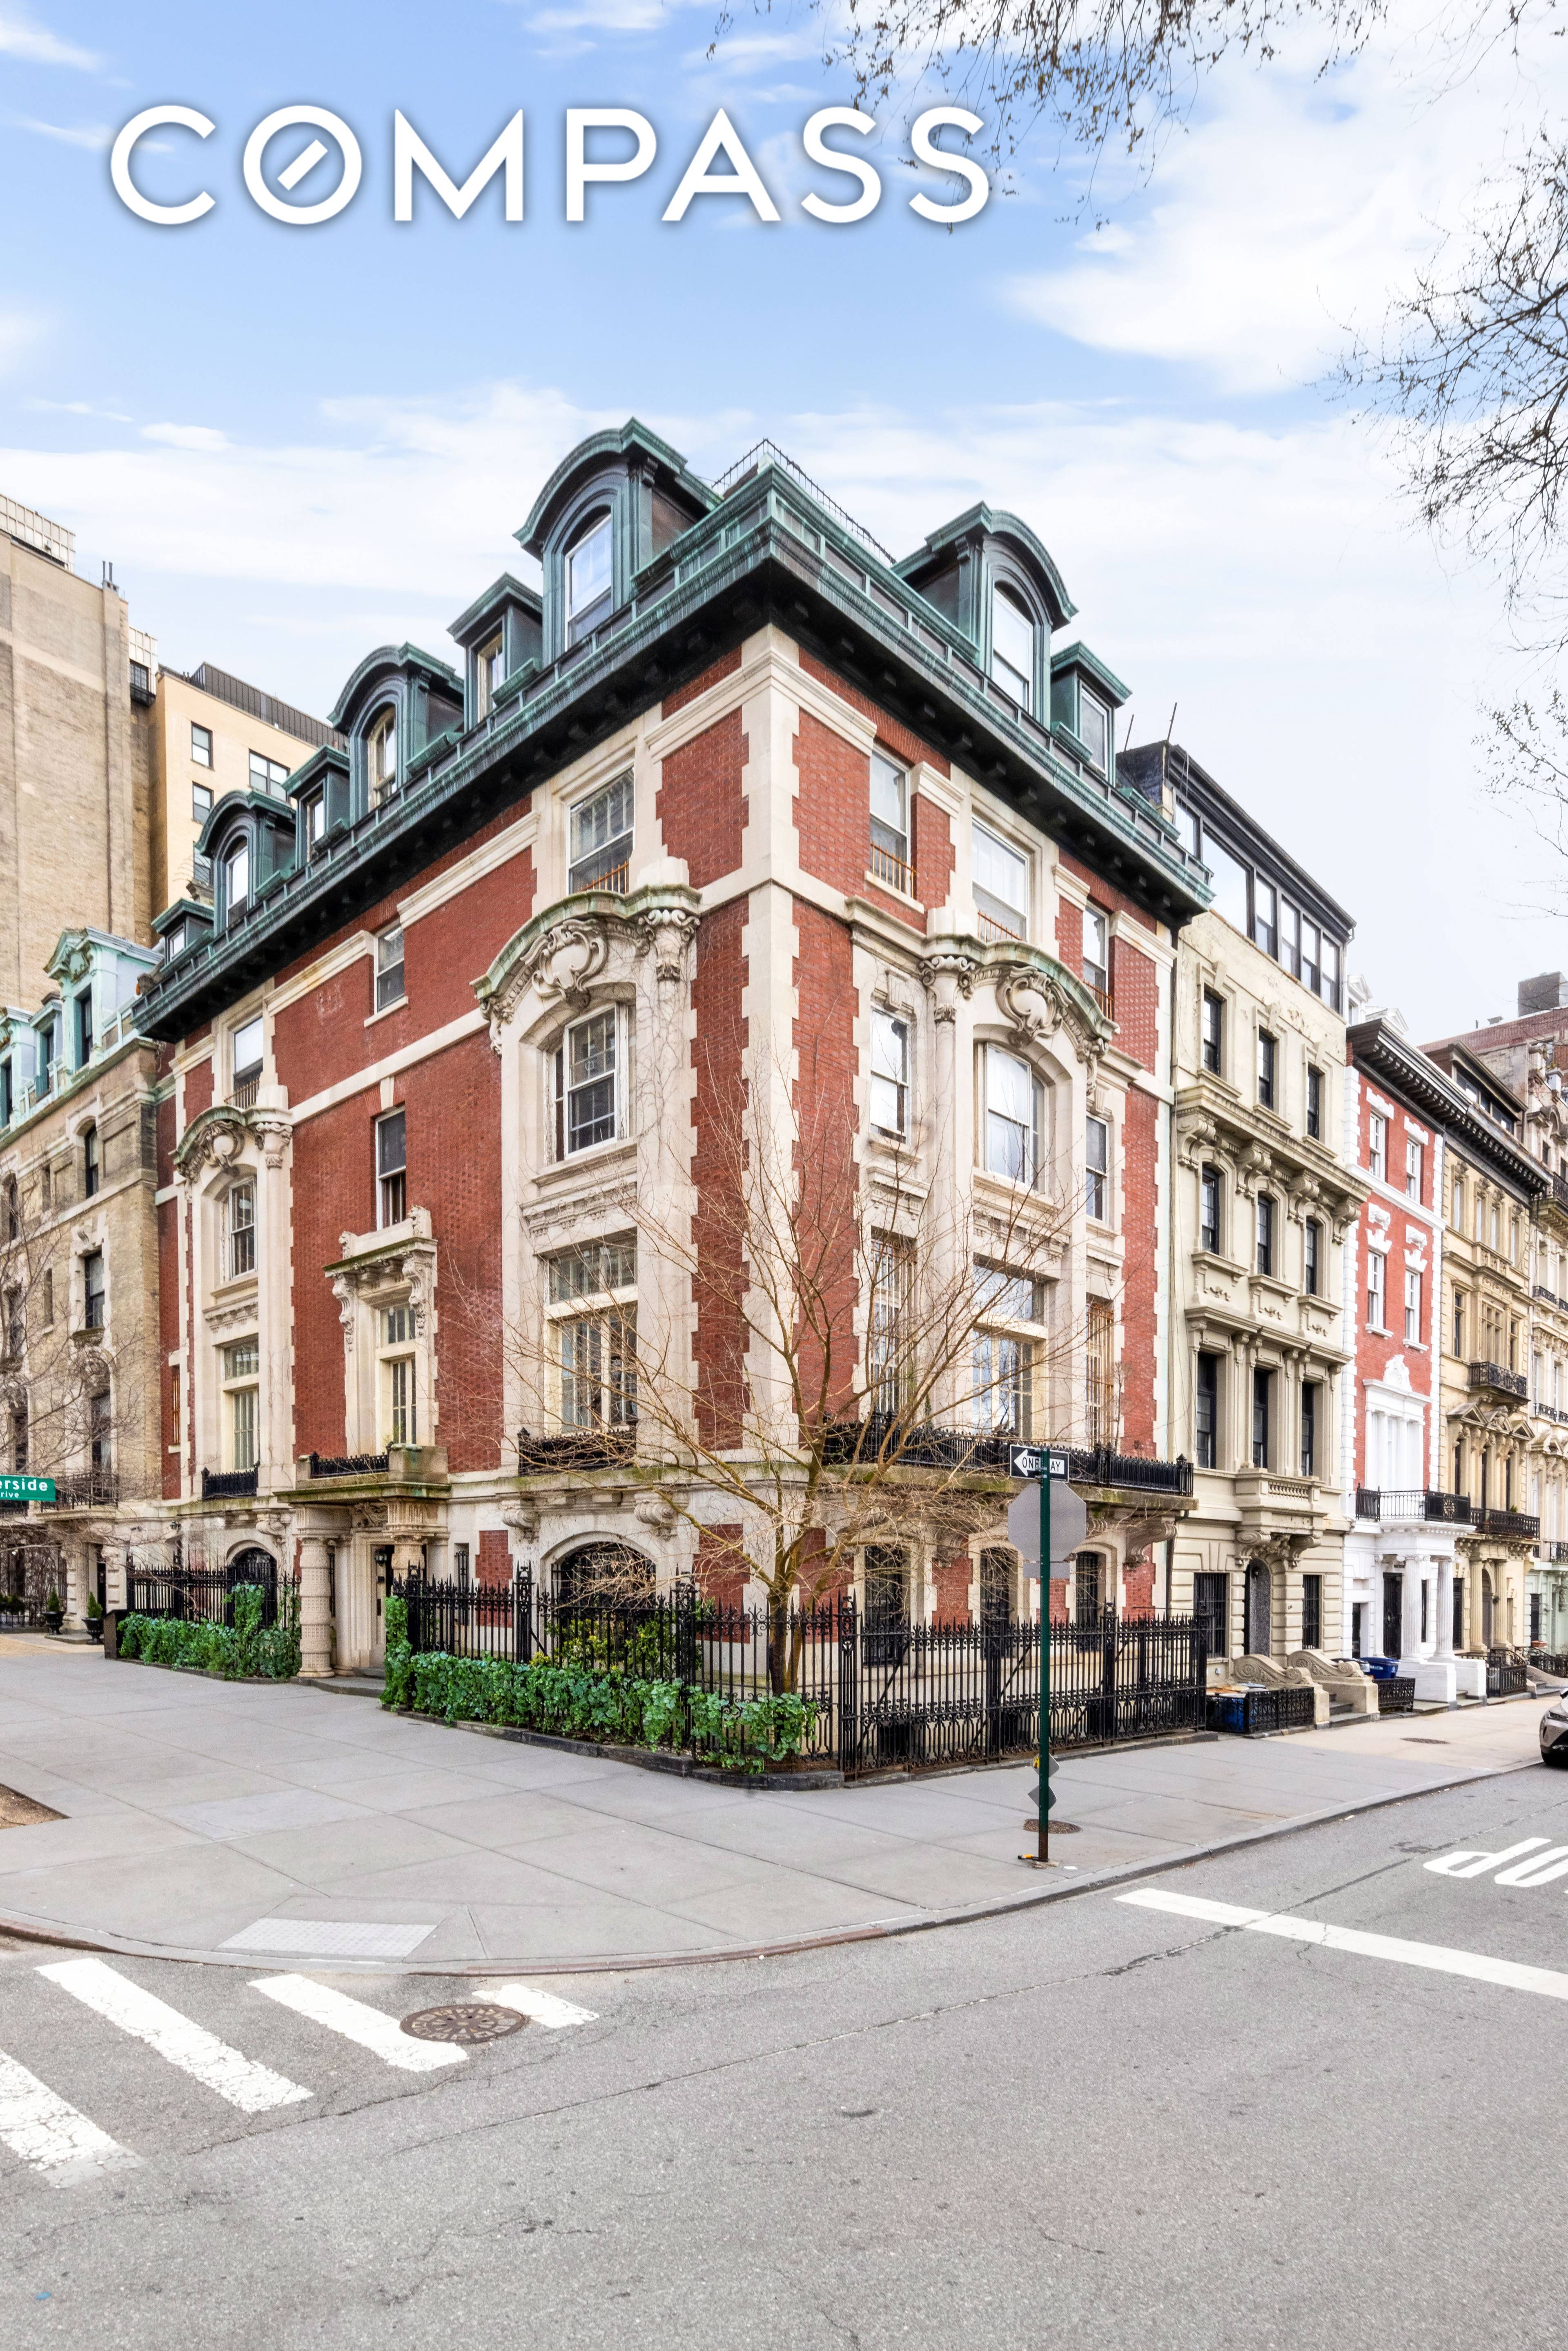 Presenting The River Mansion, an iconic single family home located at 337 Riverside Drive in the historic Riverside Drive West 105th Street District of the Upper West Side.